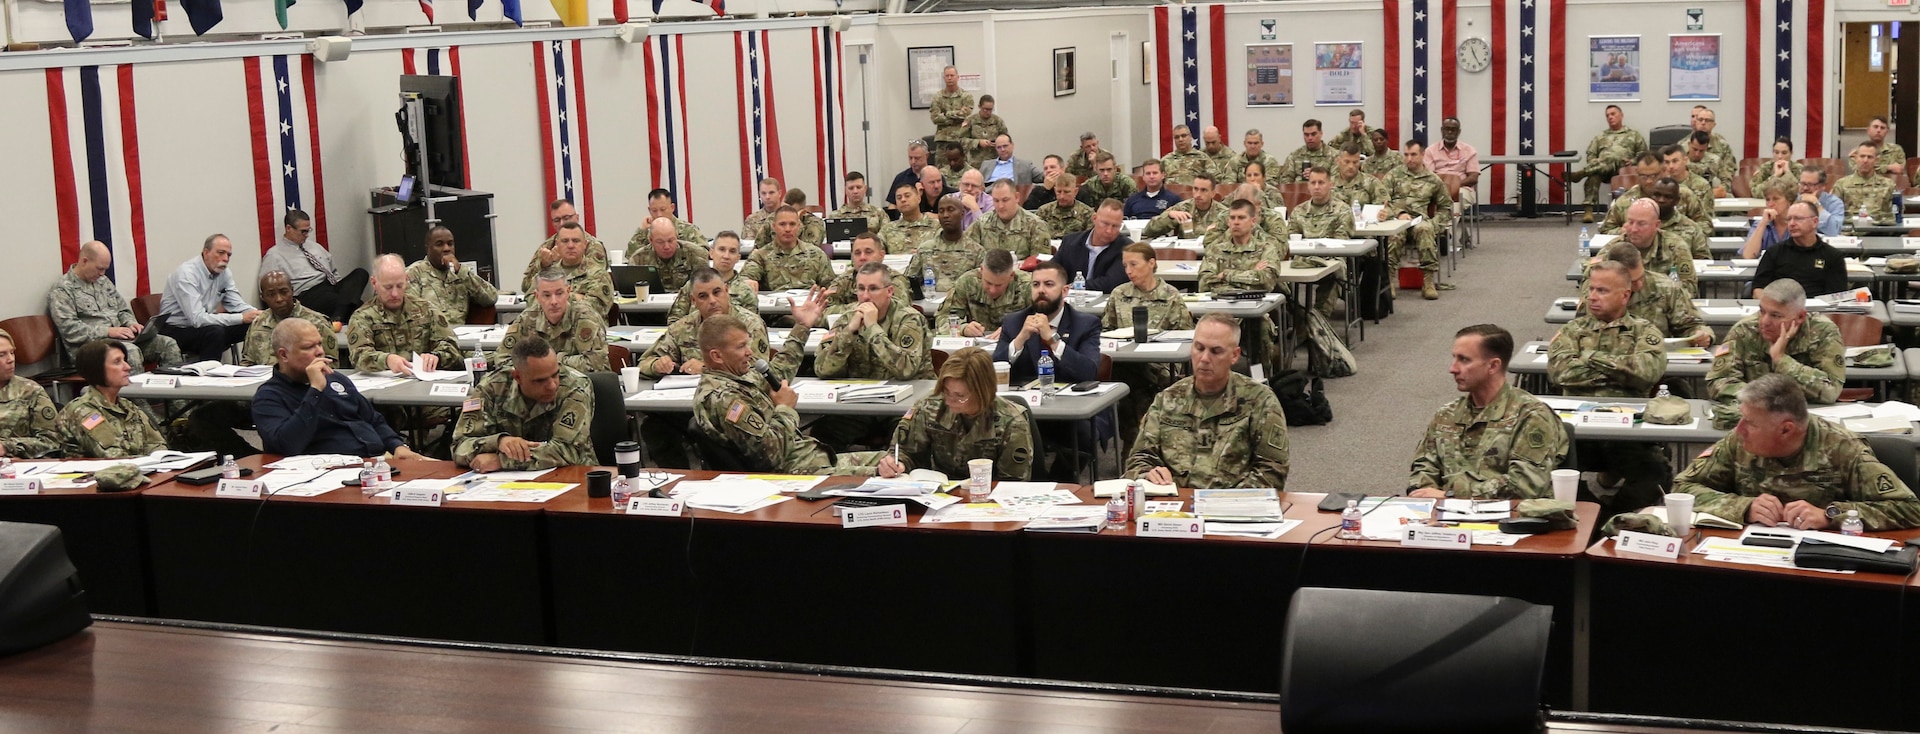 Lt. Gen. Jeffrey S. Buchanan, U.S. Army North commanding general, hosts personnel from federal, state, U.S. Territories and military agencies at the 2019 ARNORTH Hurricane Rehearsal of Concept Drill at Joint Base San Antonio-Fort Sam Houston June 12. The ROC Drill helped synchronize active duty military support efforts with federal, state, territorial and local partners to ensure seamless support in a hurricane response event.